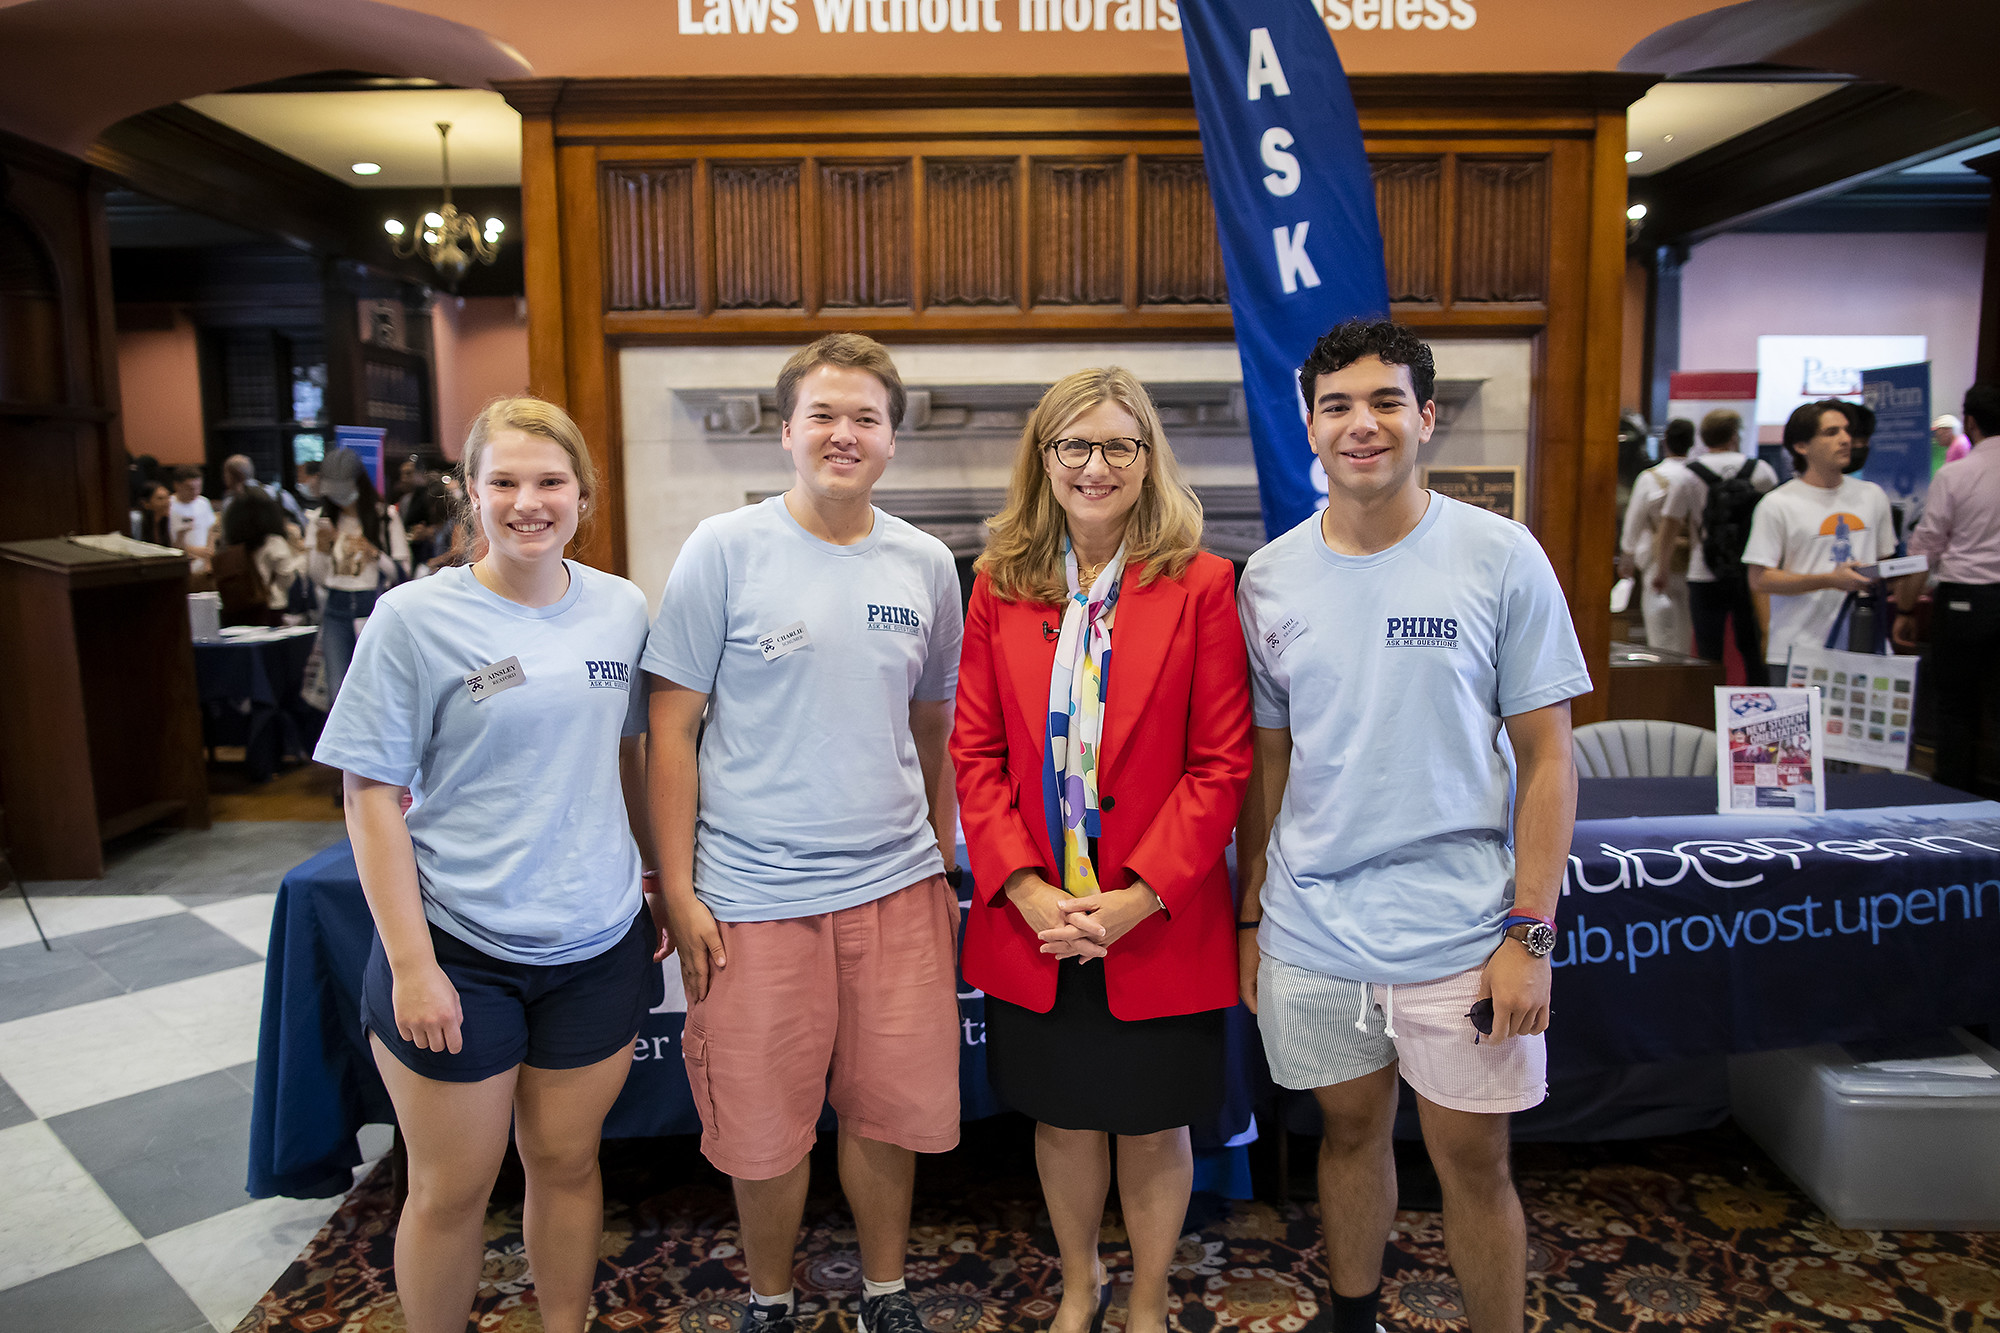 Penn President Liz Magill stands in Houston Hall with members of PHINS.